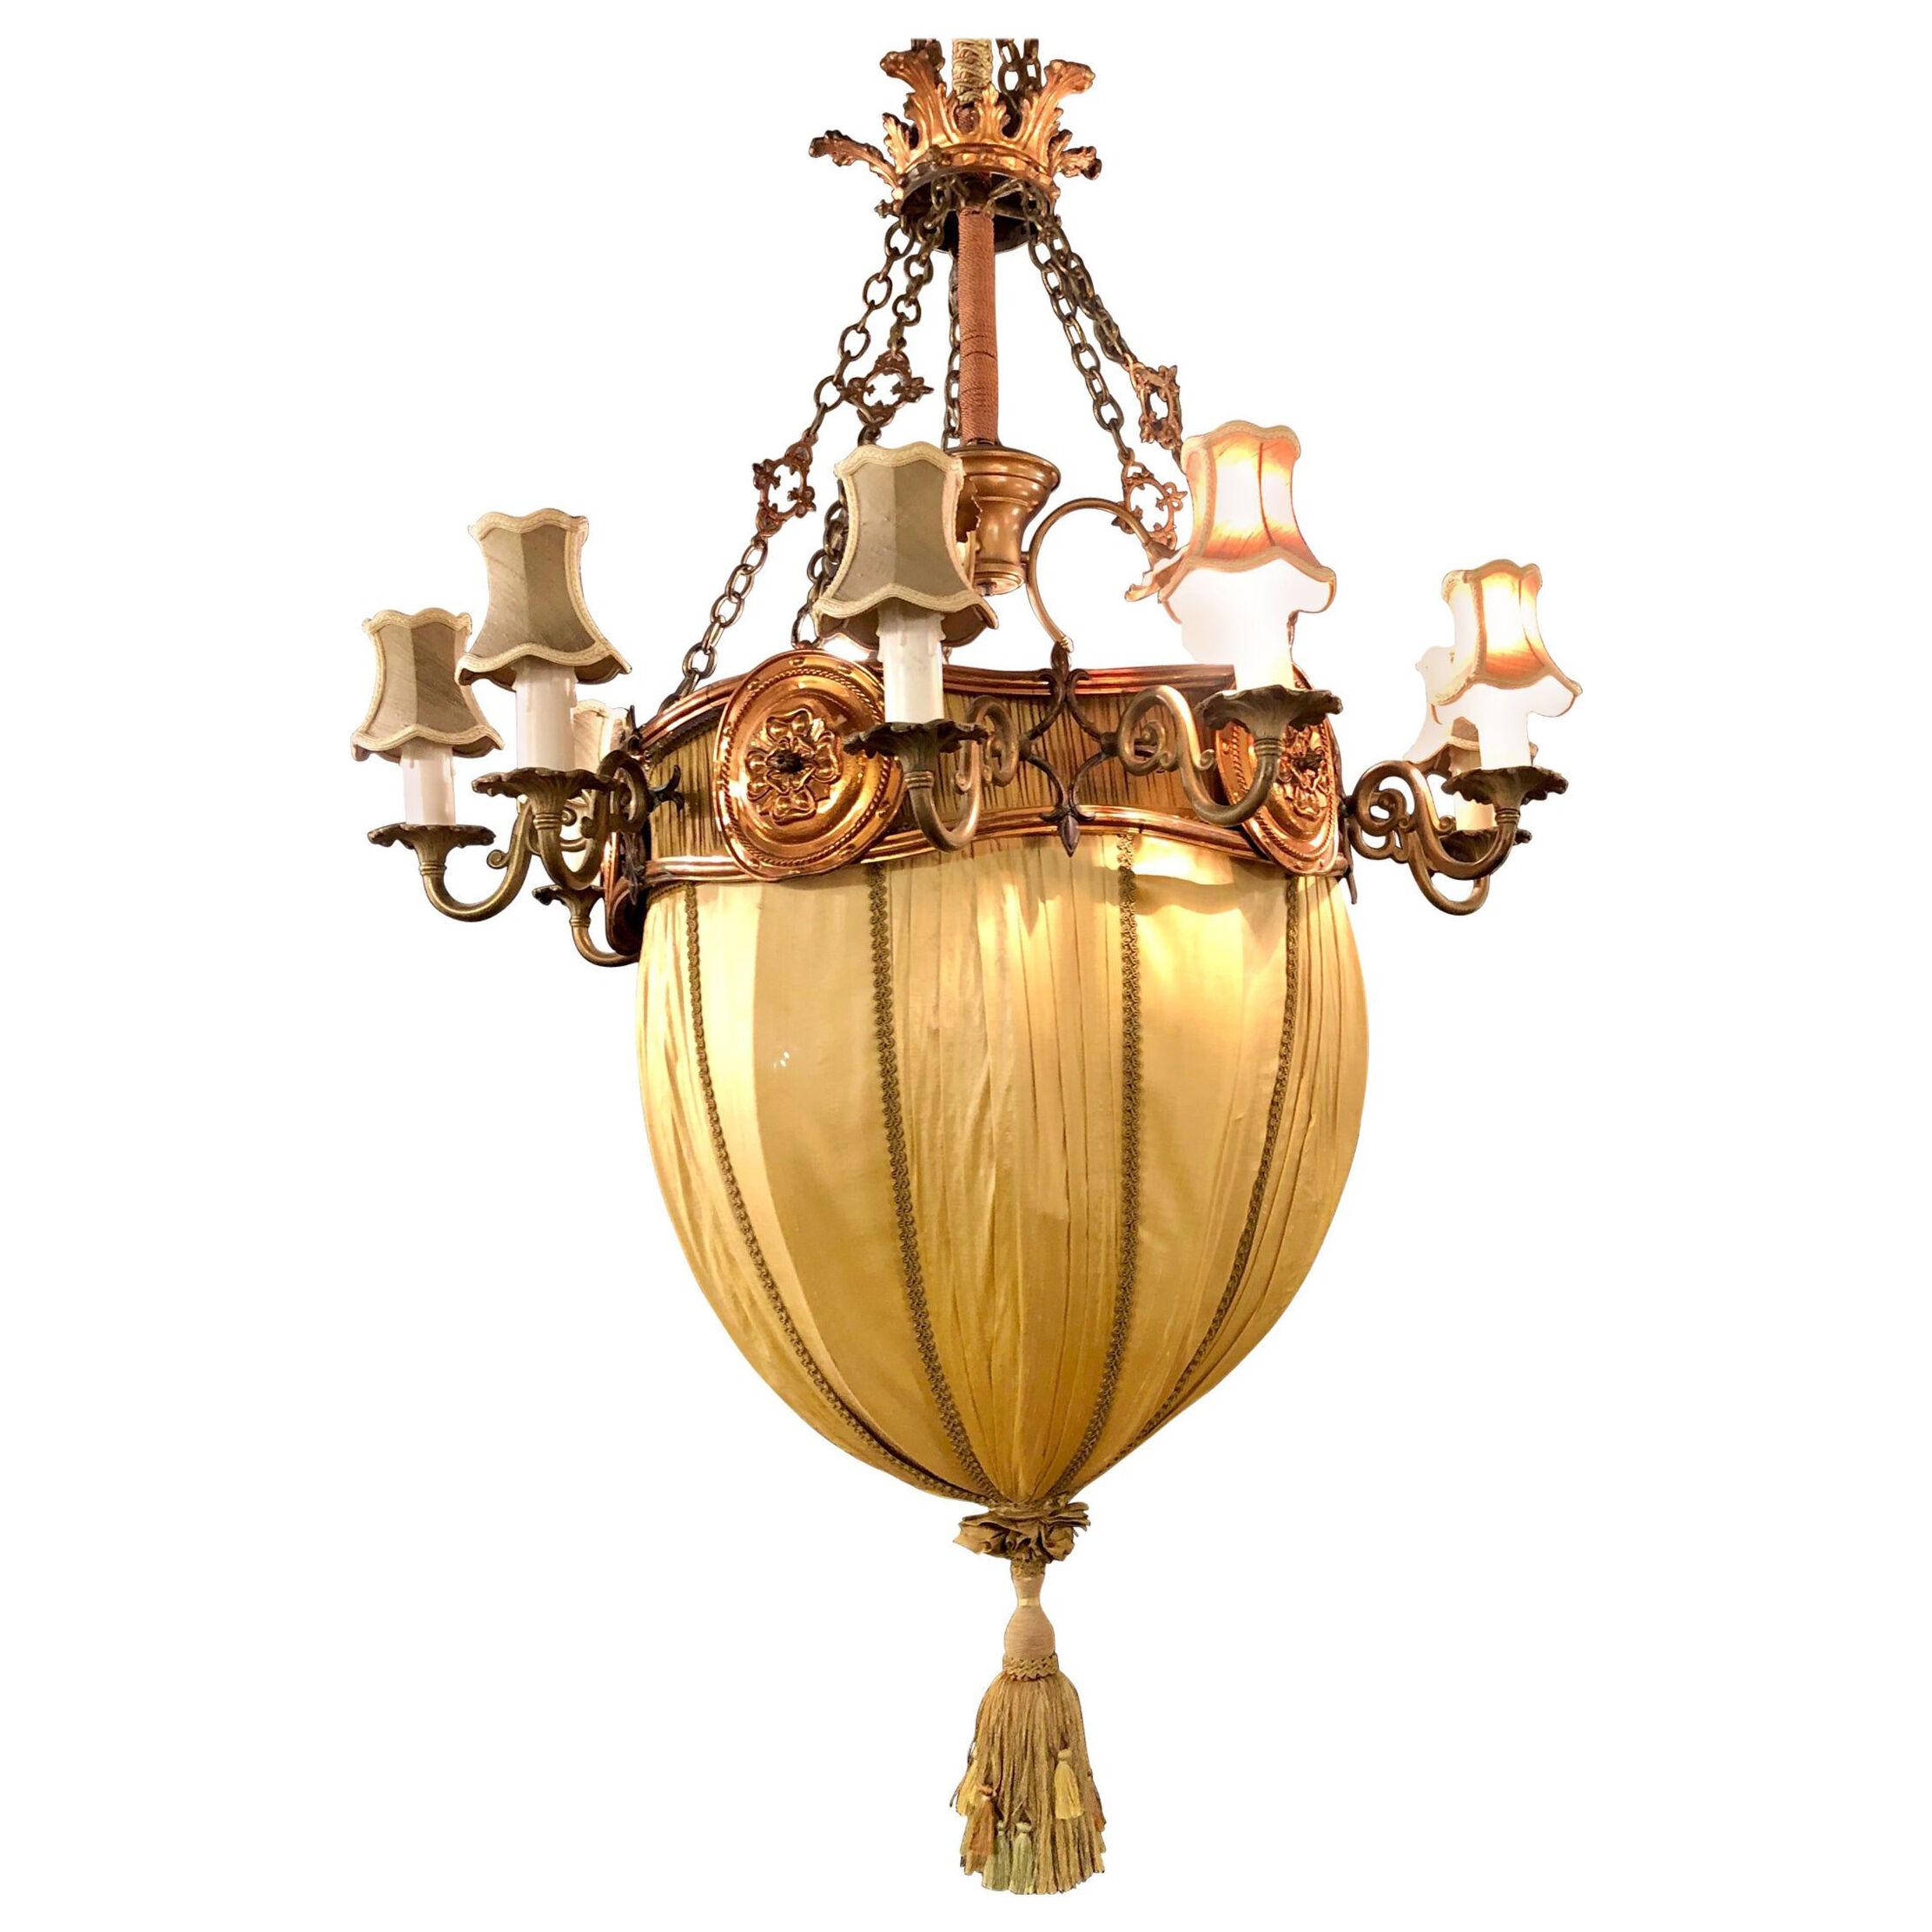 Palatial Light Fixture in Copper, Brass and Iron with Silk Dome Shade